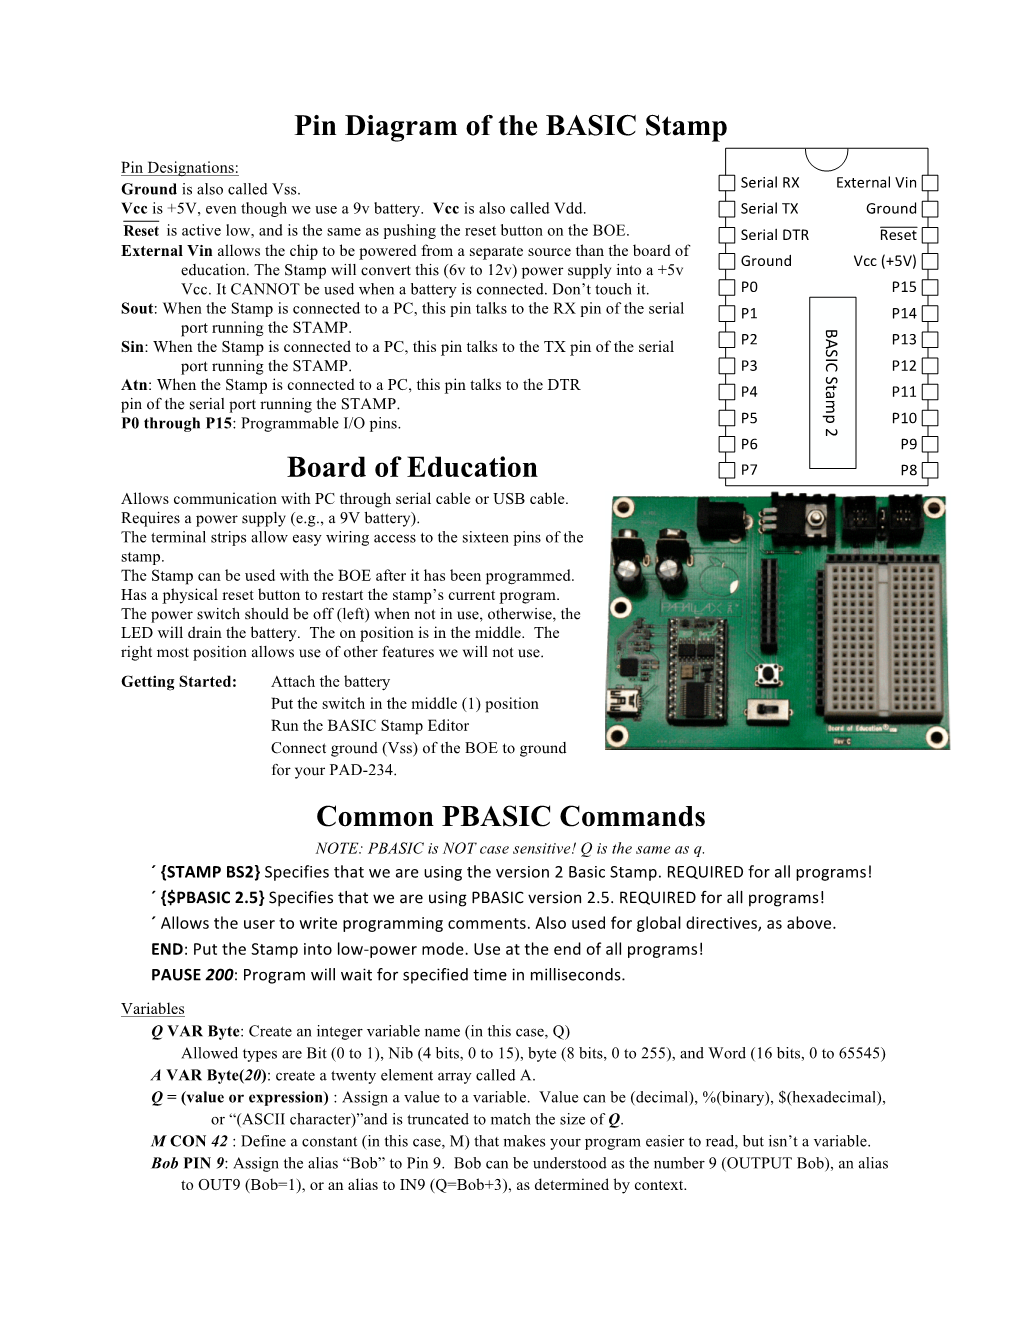 Pin Diagram of the BASIC Stamp Board of Education Common